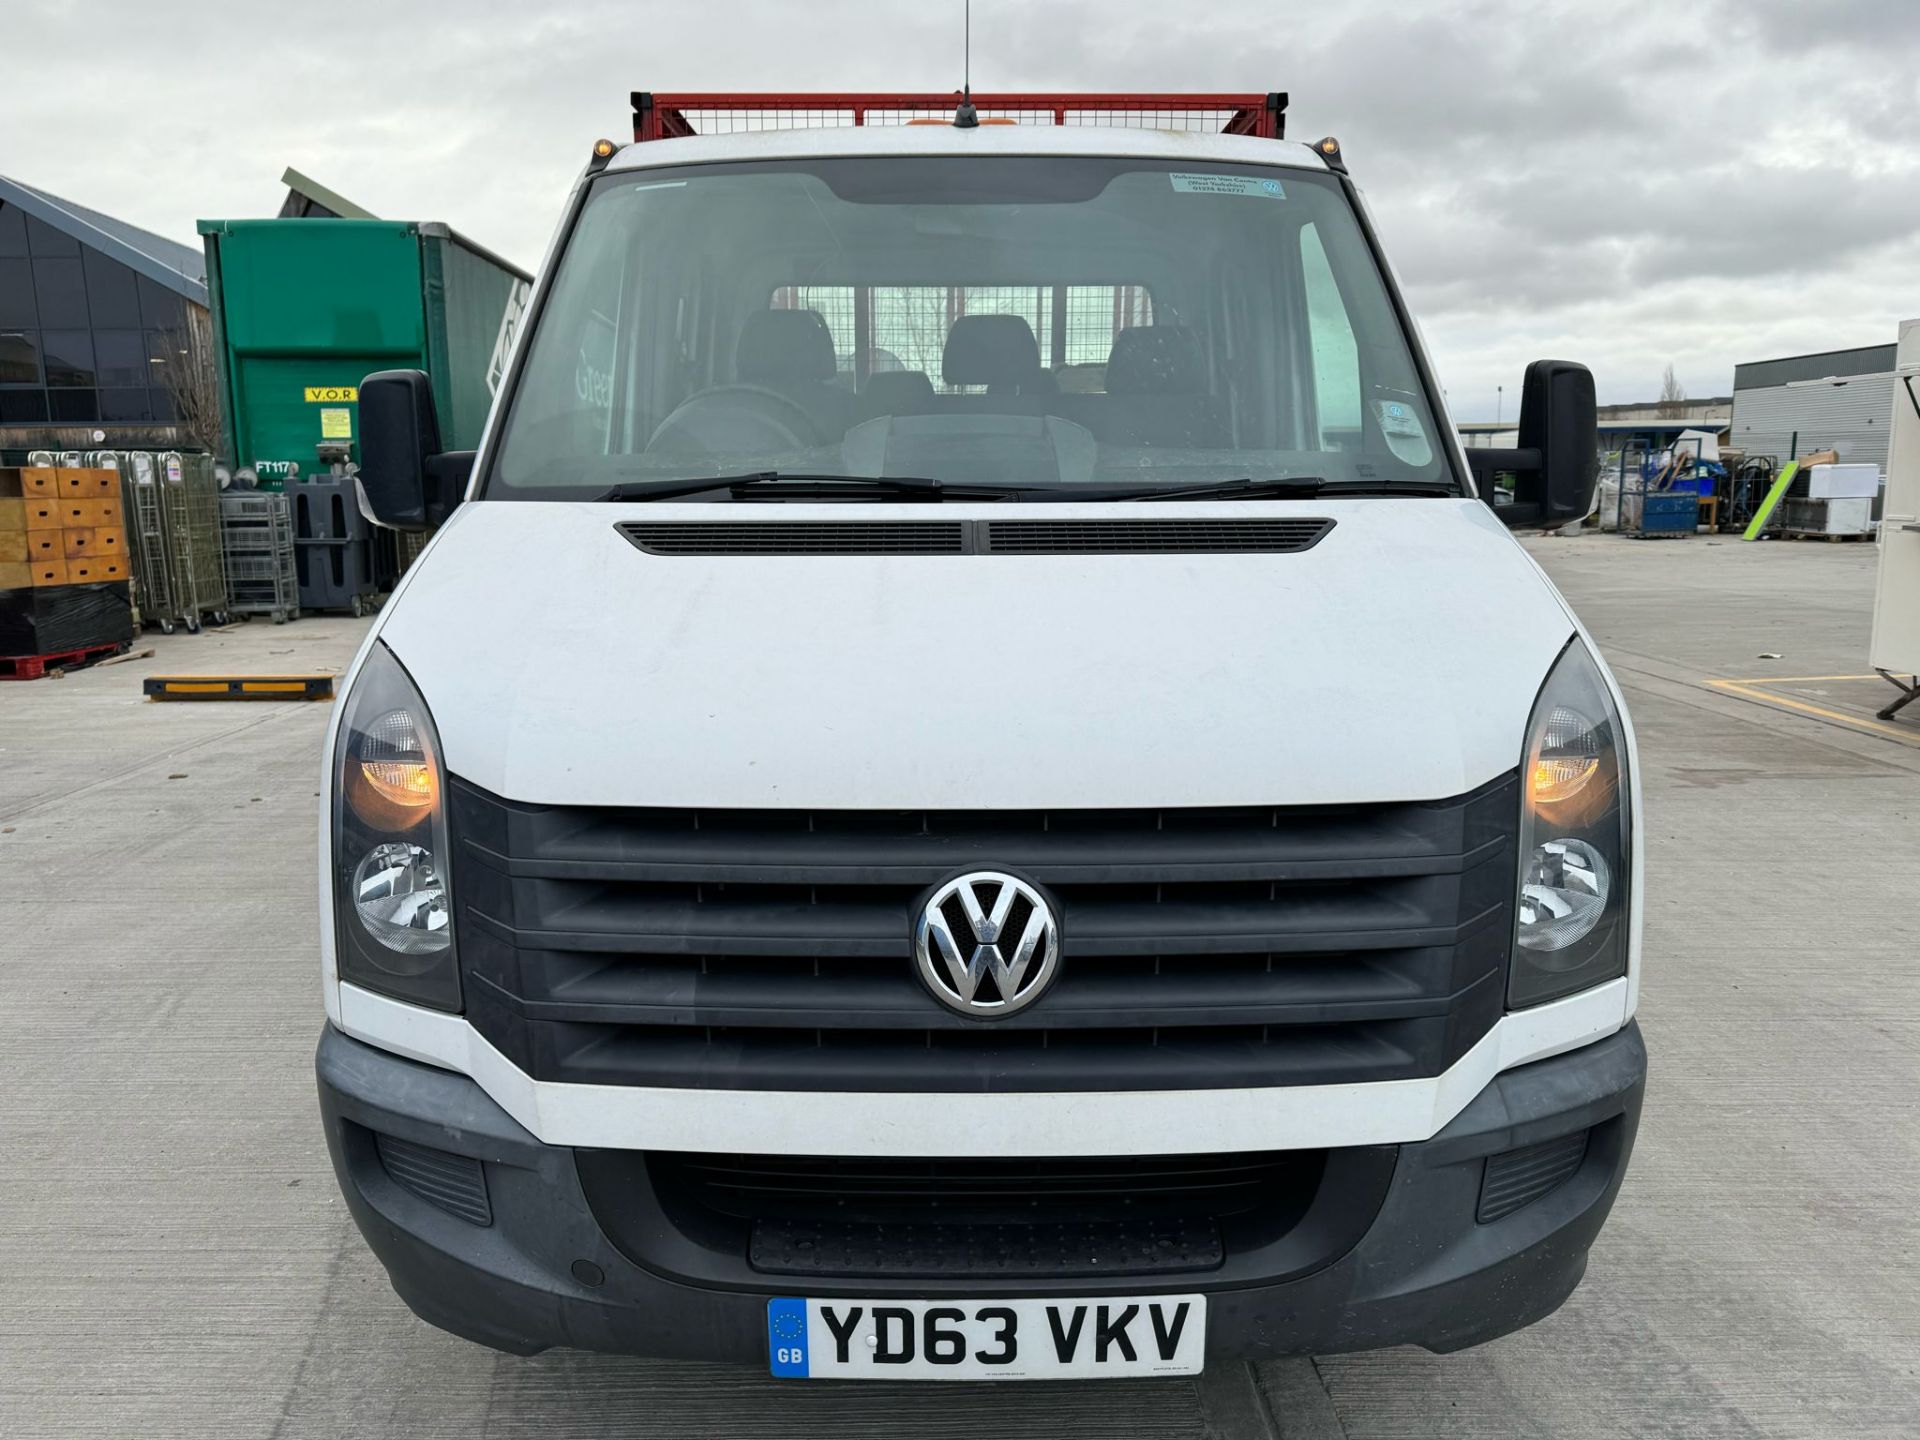 2013, VOLKSWAGEN Crafter CR50 Startline TDI, HGV Caged Tipper Van (Ex-Council Owned & Maintained) - Image 5 of 42